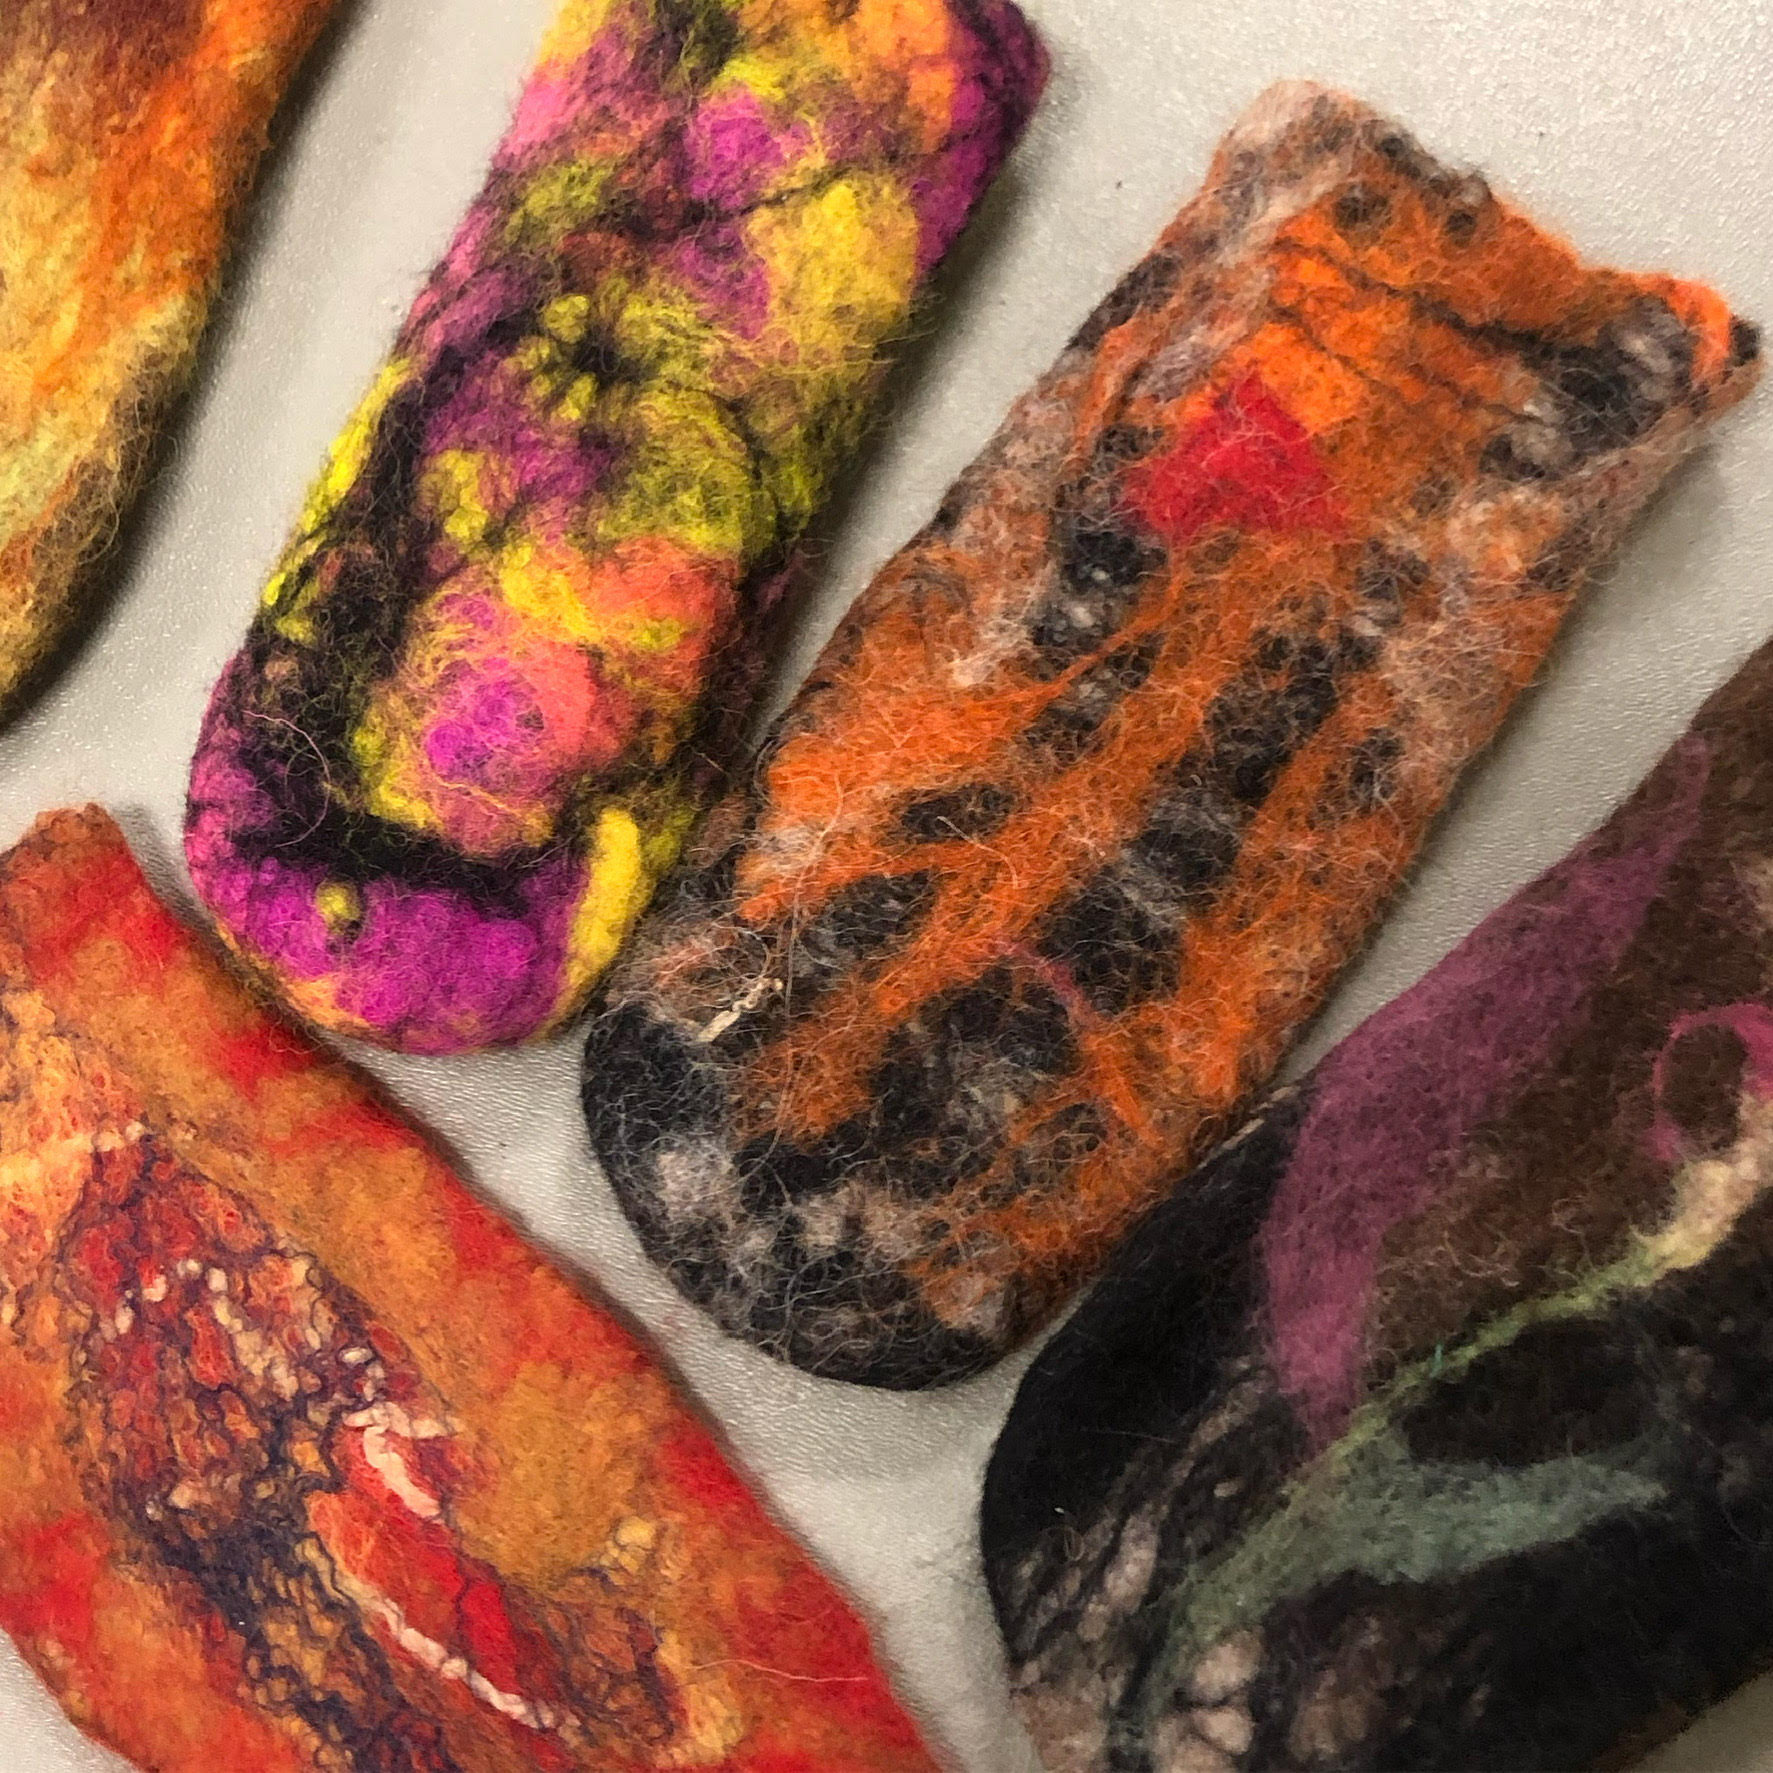 A photo of eyeglass cases made from felted wool.